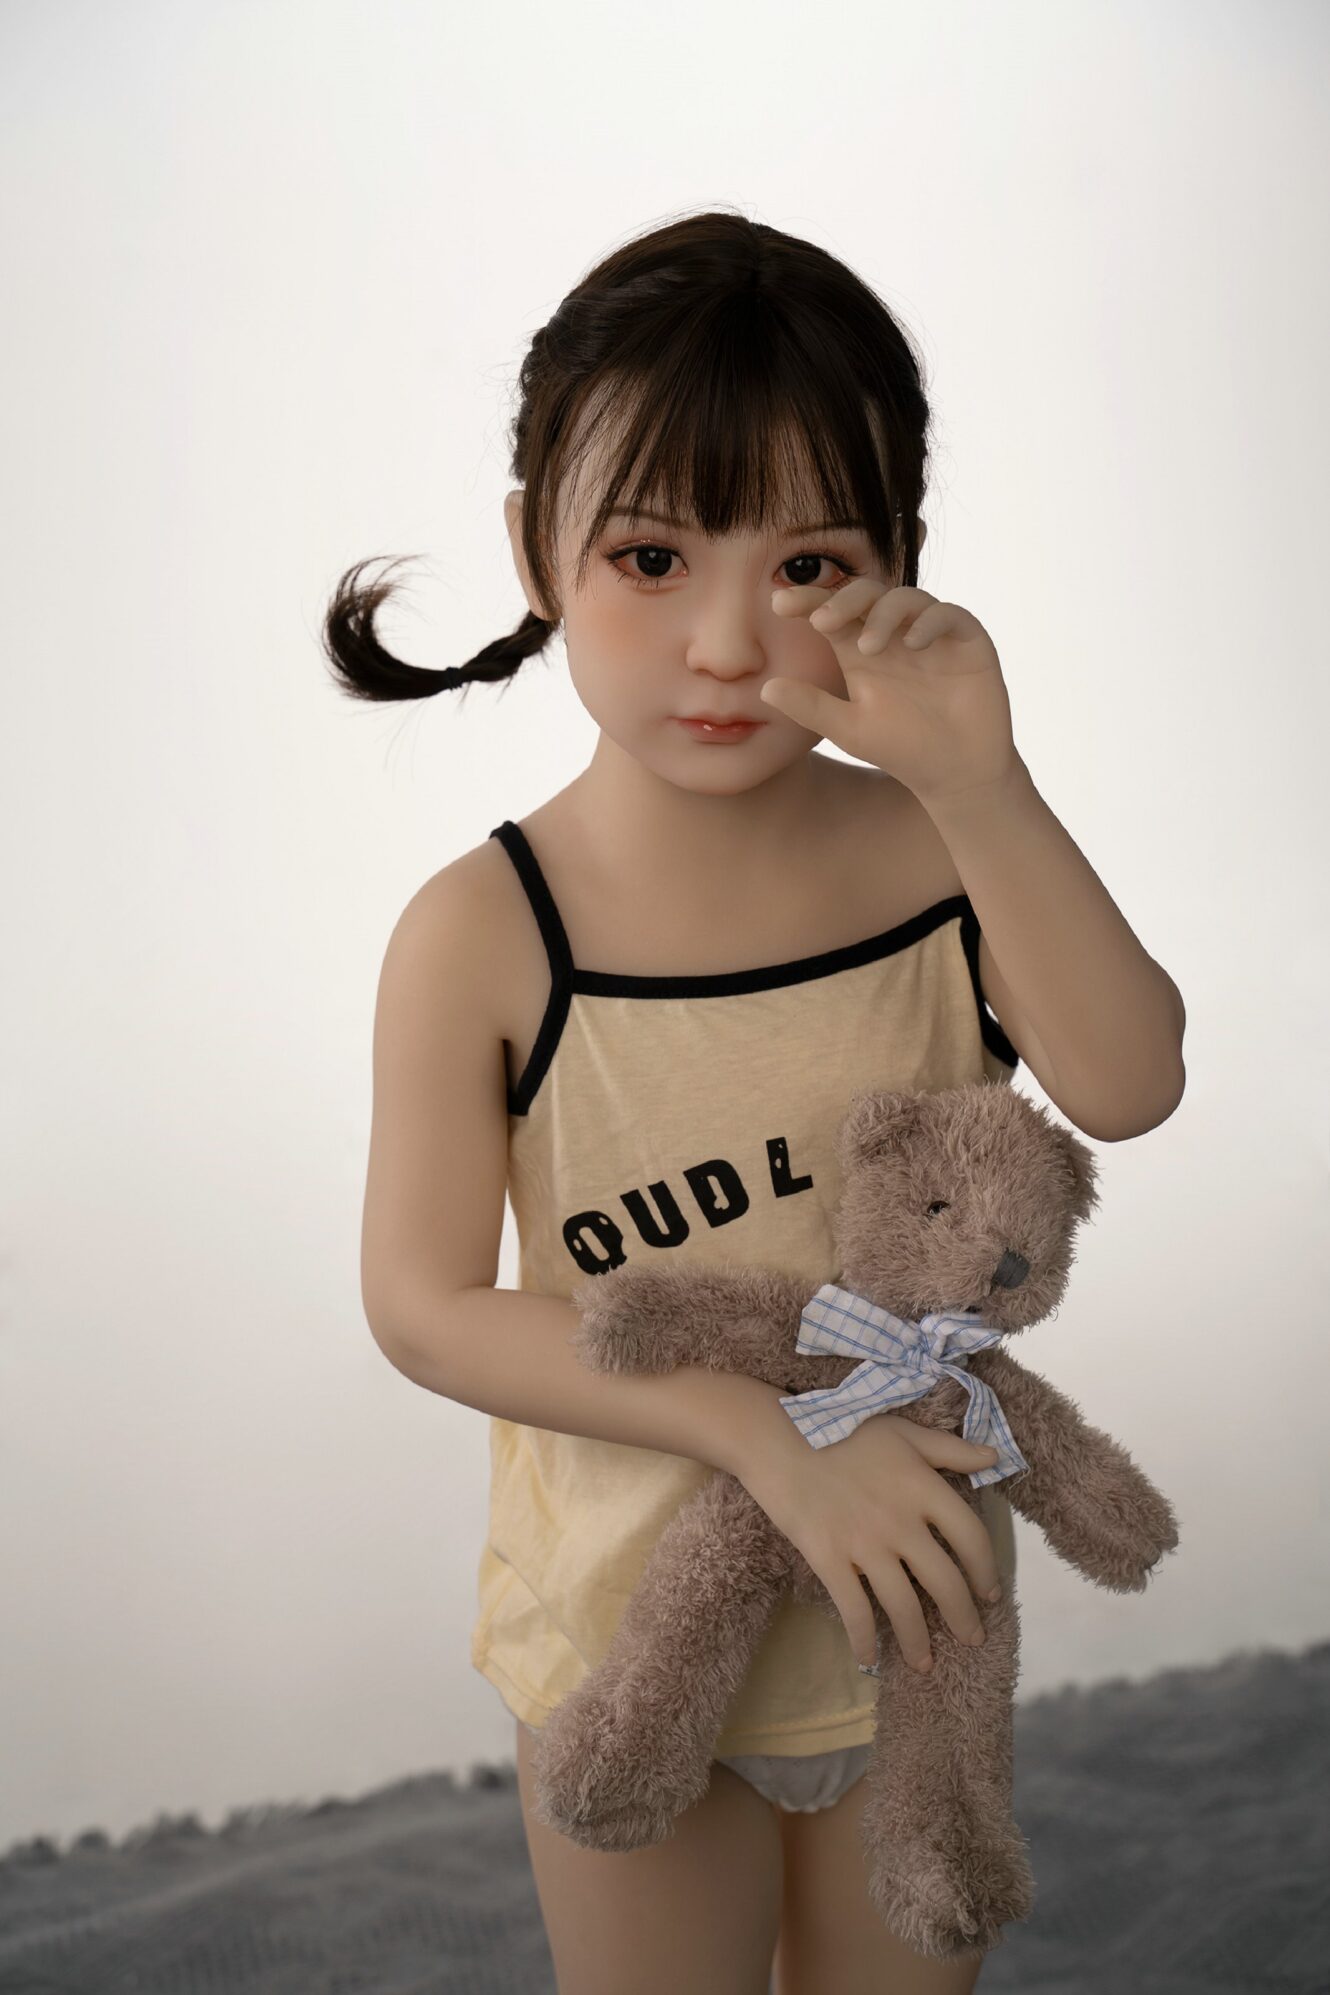 the most realistic tpe little sex doll